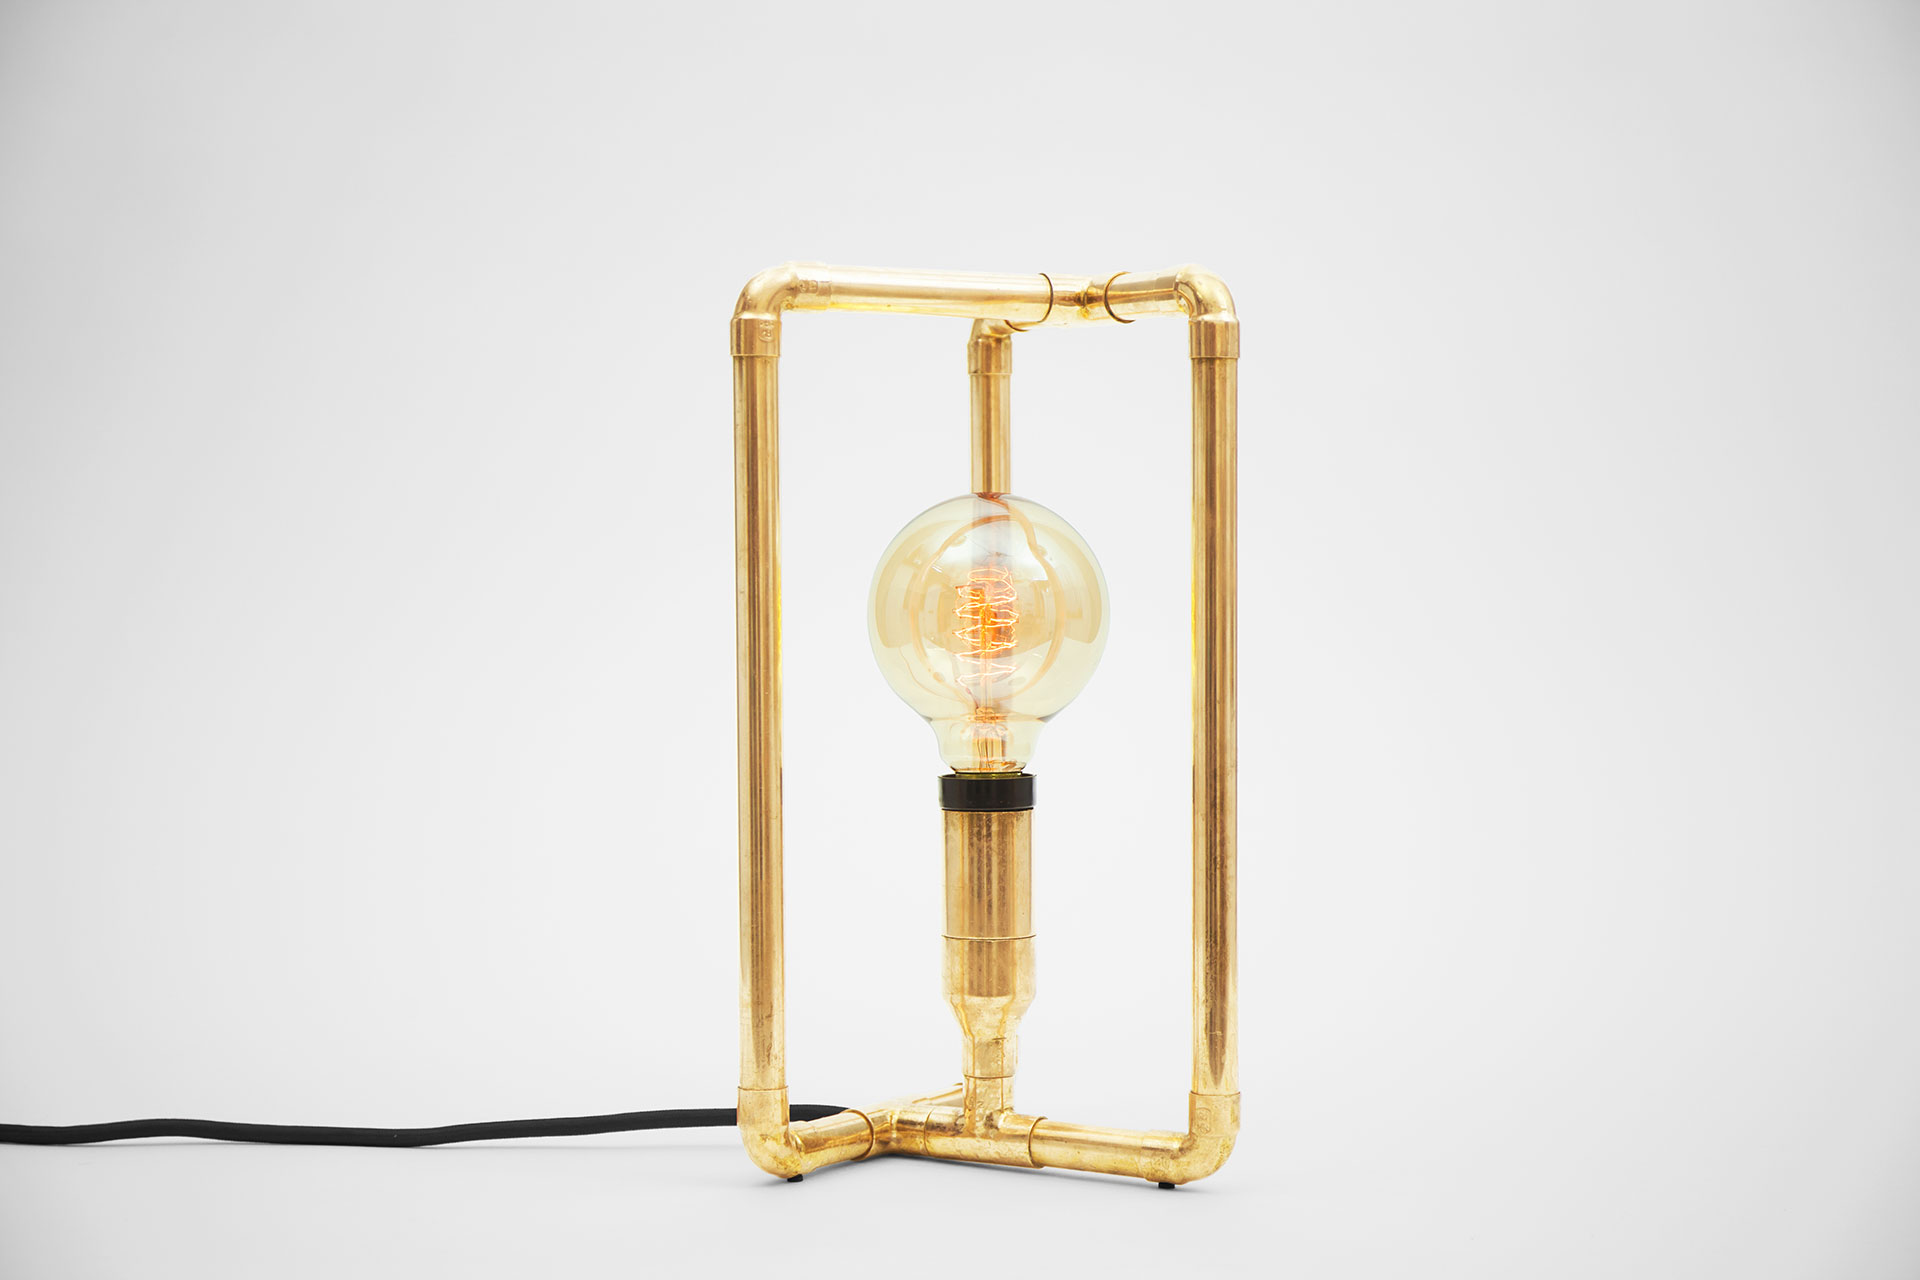 Small bedside lamp in gold brass metal finish with retro Tesla bulb inspired by modern minimalist design